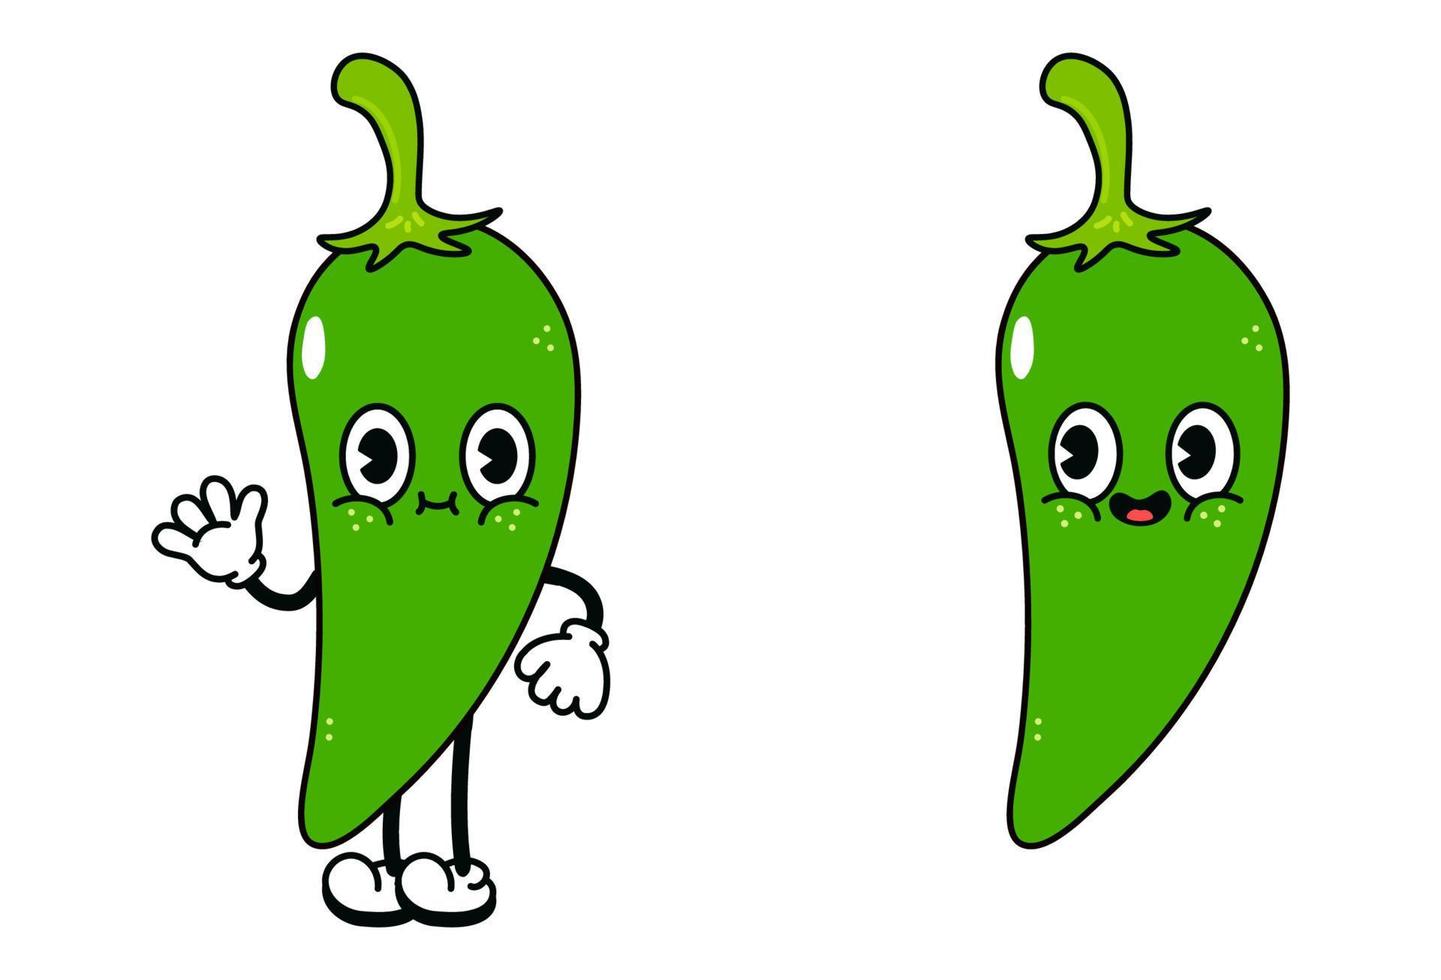 Cute funny green chili pepper waving hand character. Vector hand drawn traditional cartoon vintage, retro, kawaii character illustration icon. Isolated on white background. chili pepper character